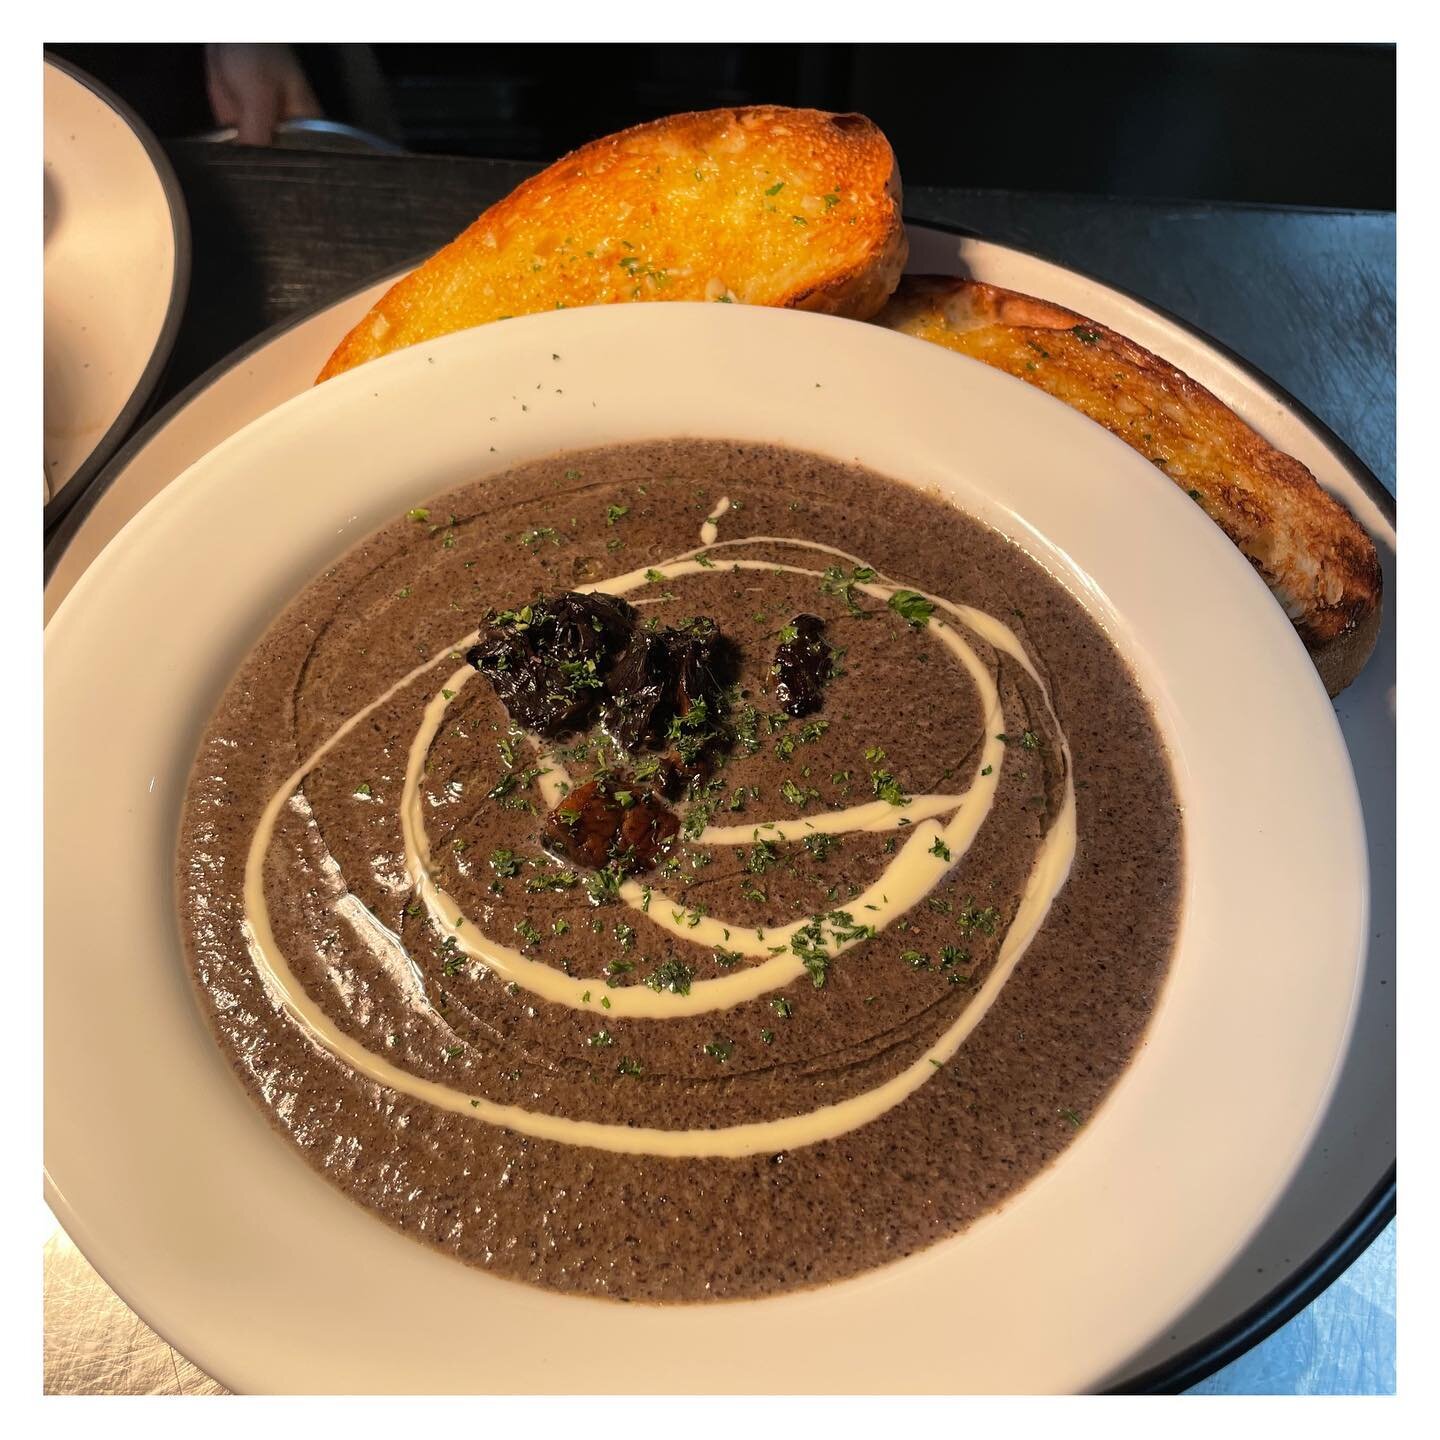 House Made Creamy Mushroom Soup 🙌🏼

Served with toasted garlic ciabatta &amp; parsley! 💗

Available until sold out
Dine in or takeaway
54770443 📲
Montanasonbuderim.com.au 💻
.
.
.
.
#housemade #housemadesoup #mushrooms #mushroomsoup #special #sou